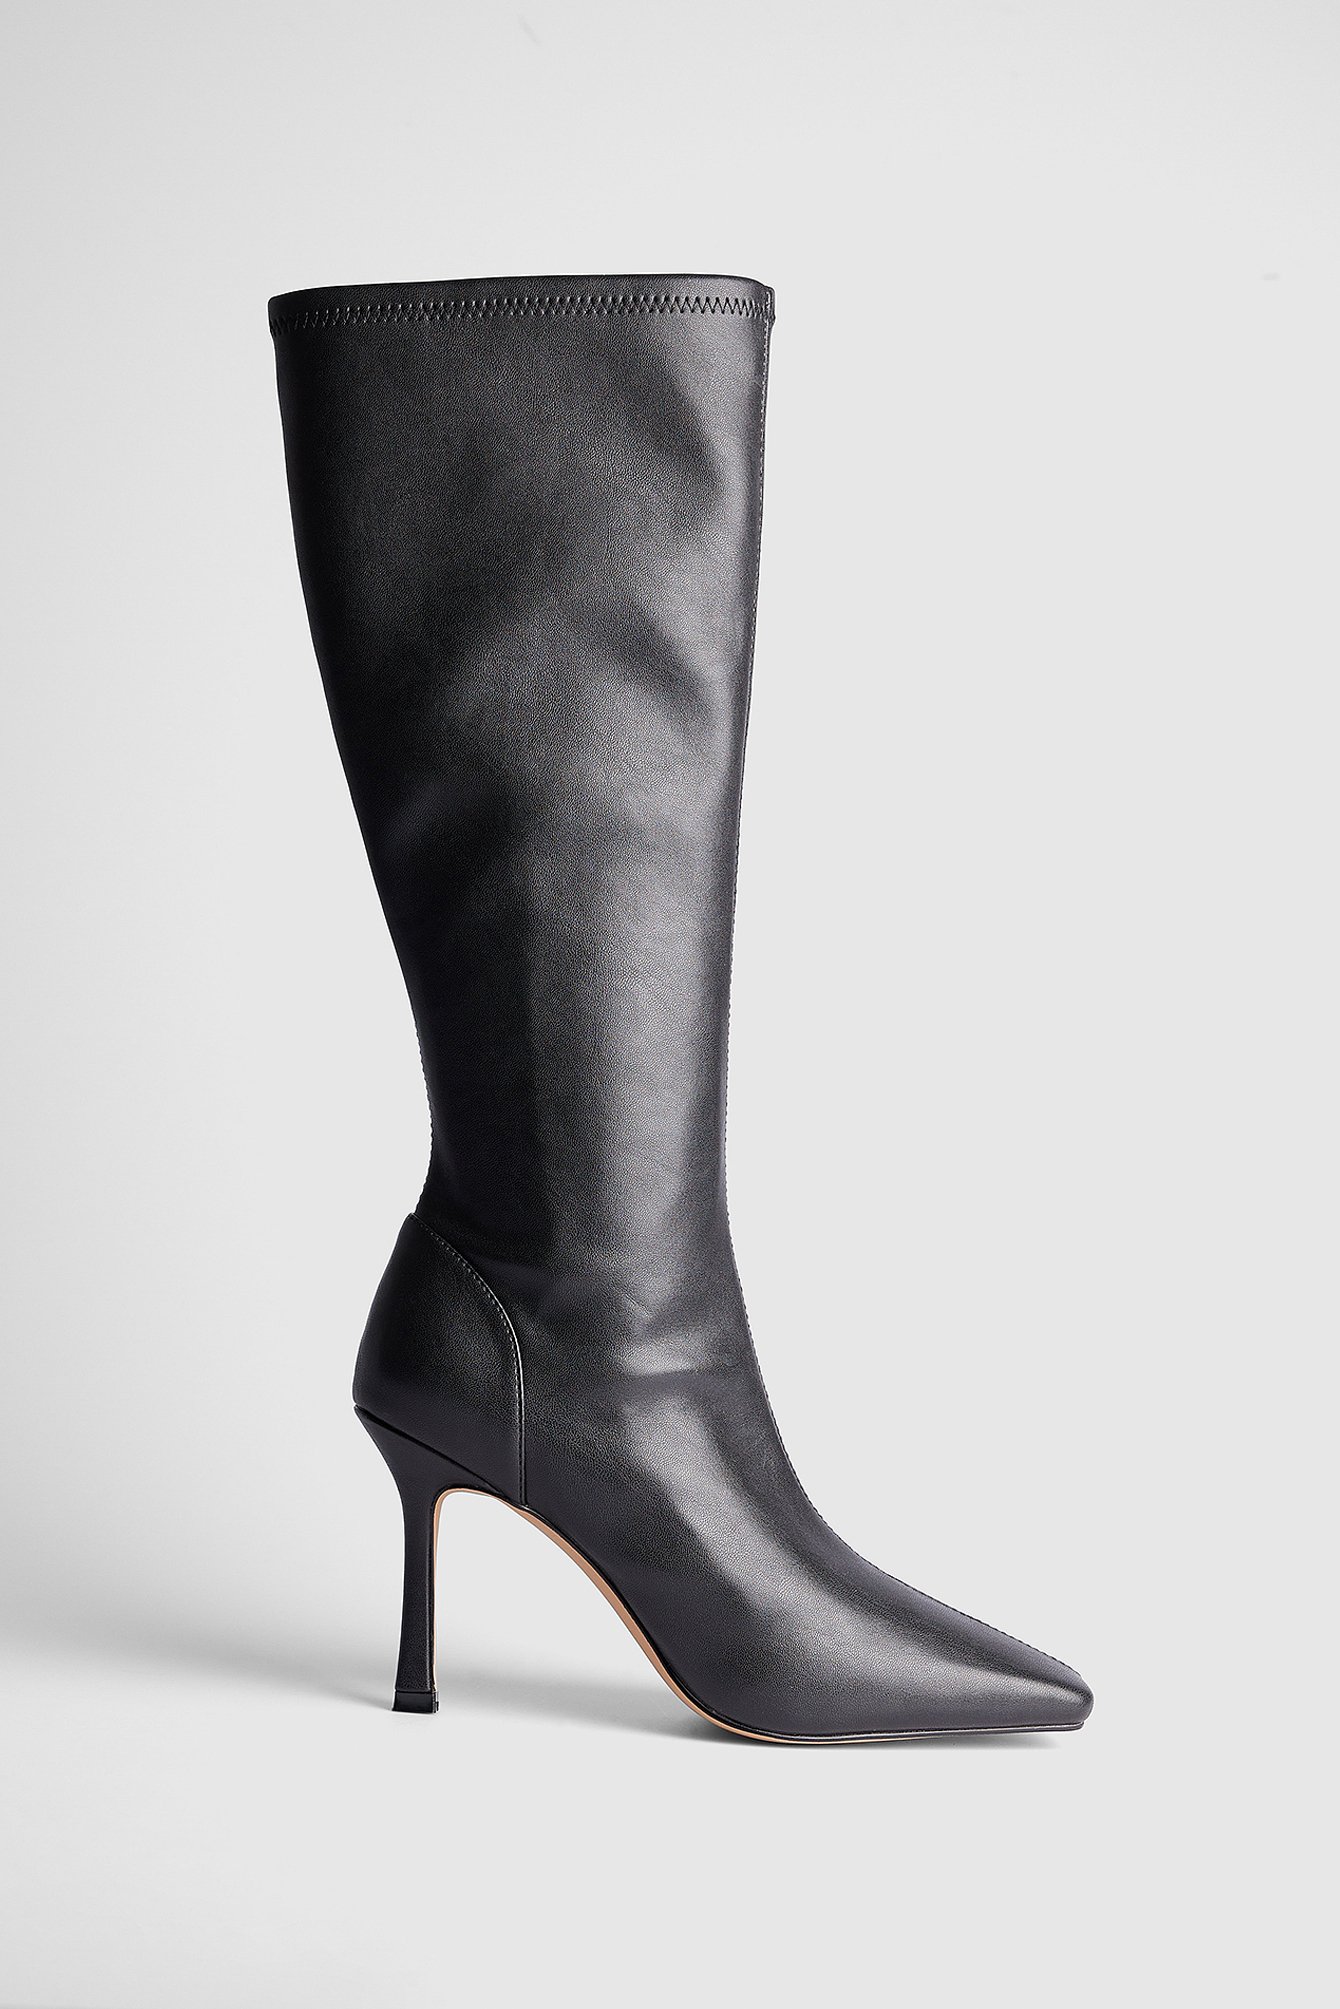 Fitted Knee High Stiletto Boots Black | NA-KD